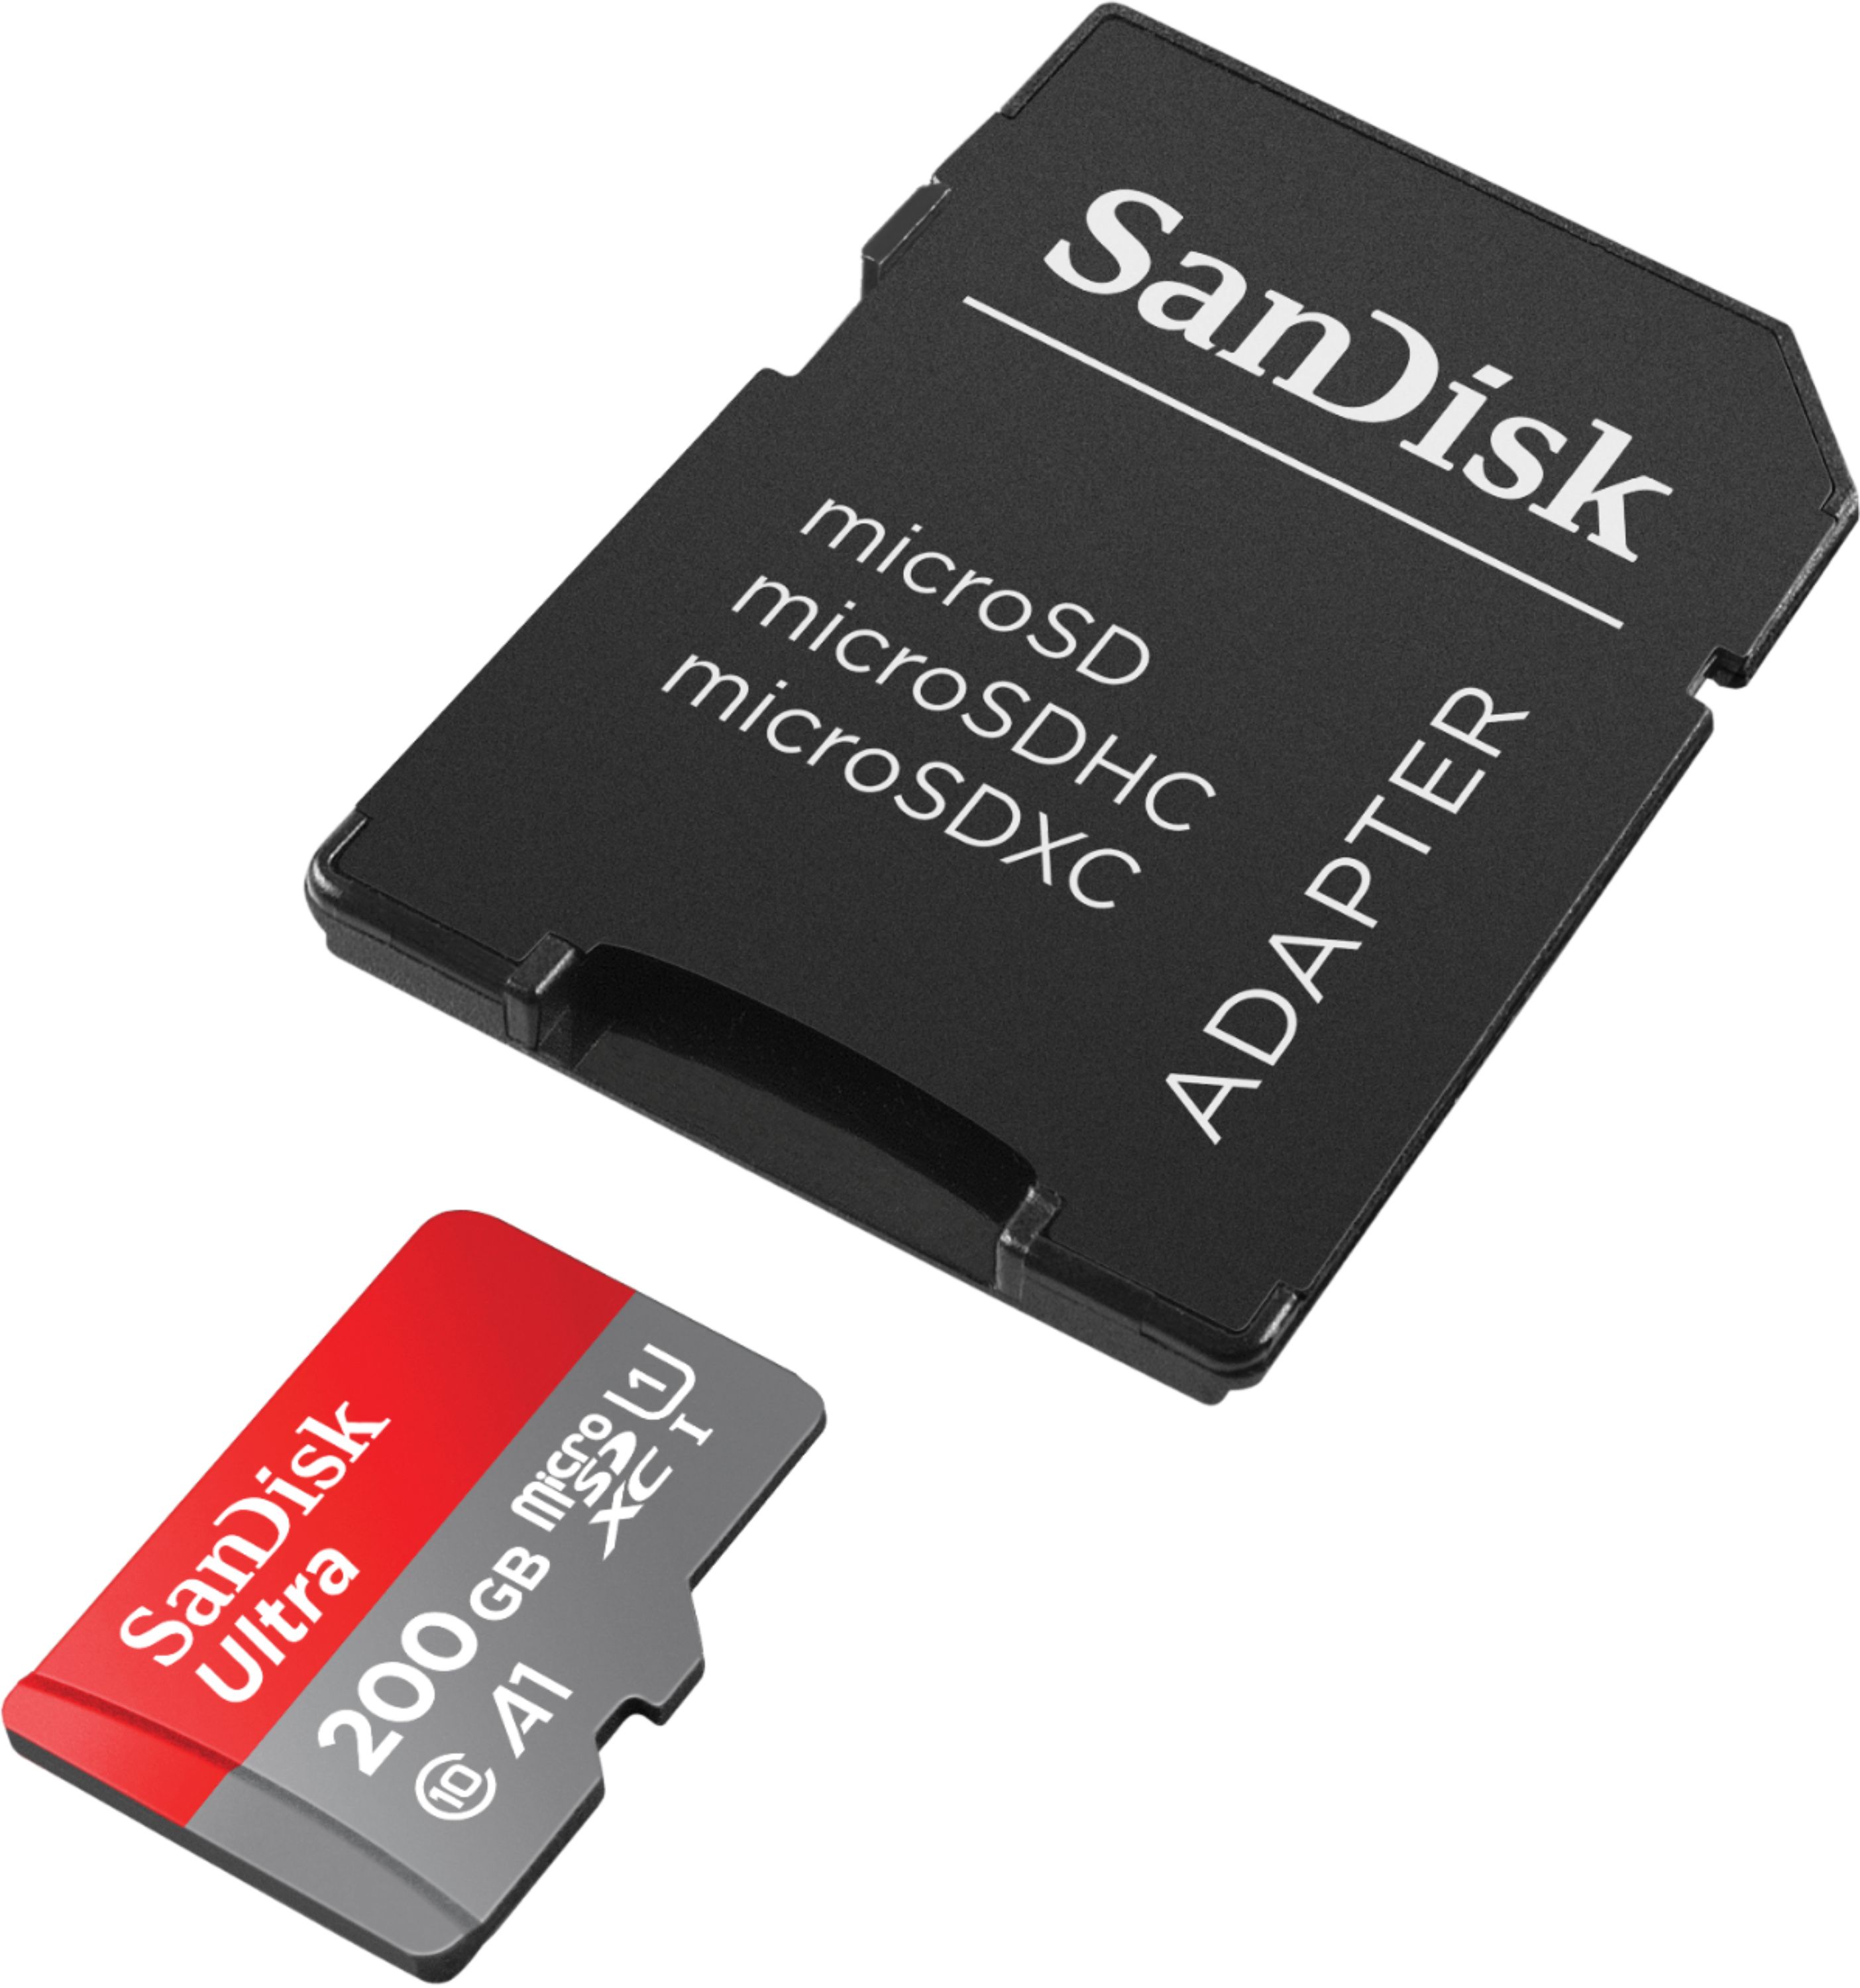 100MBs A1 U1 Works with SanDisk SanDisk Ultra 200GB MicroSDXC Verified for Apple A1920 by SanFlash 